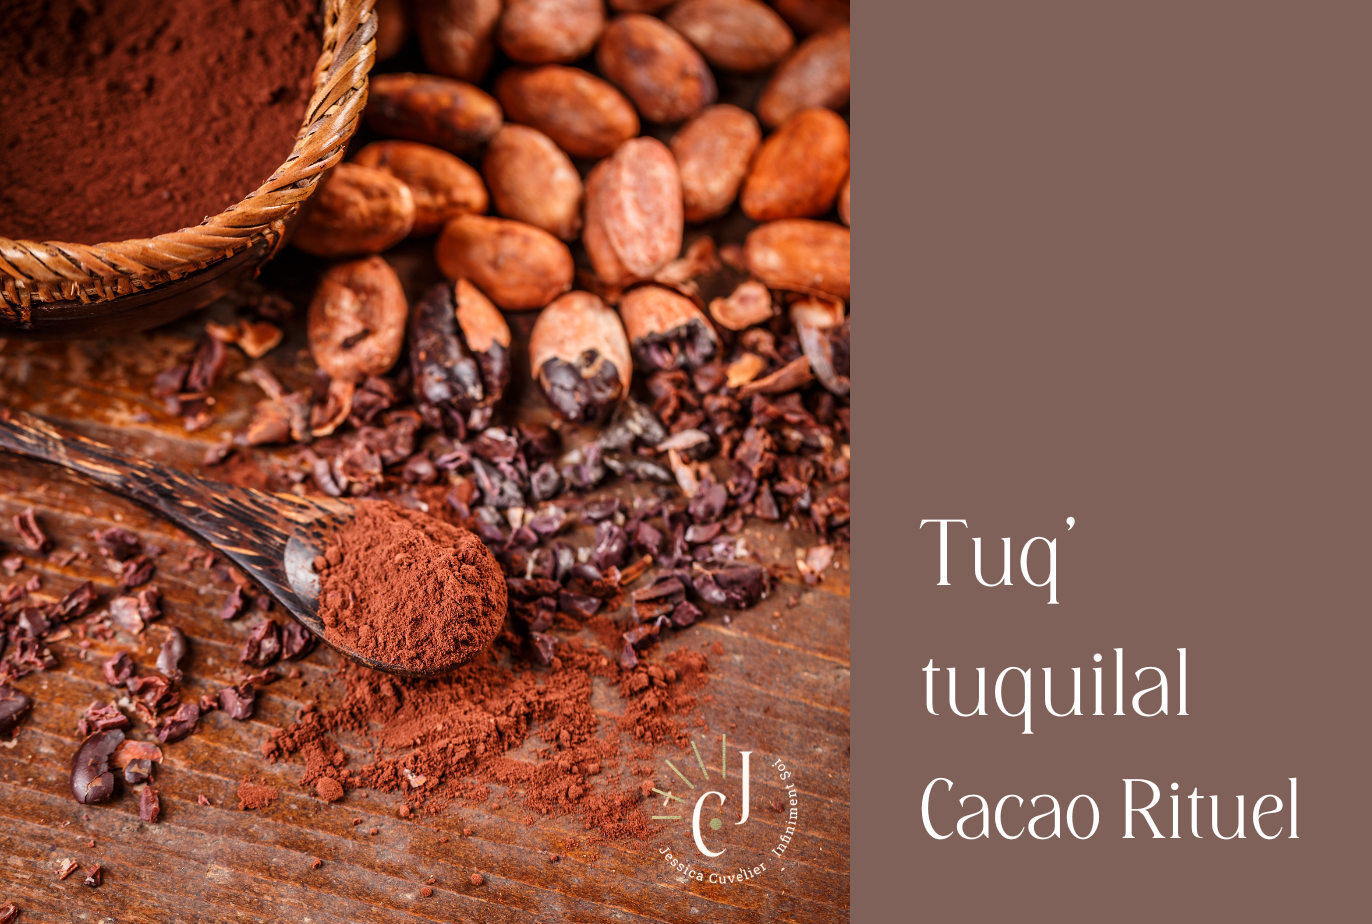 Cacao Rituel TUQ' TUQUILAL